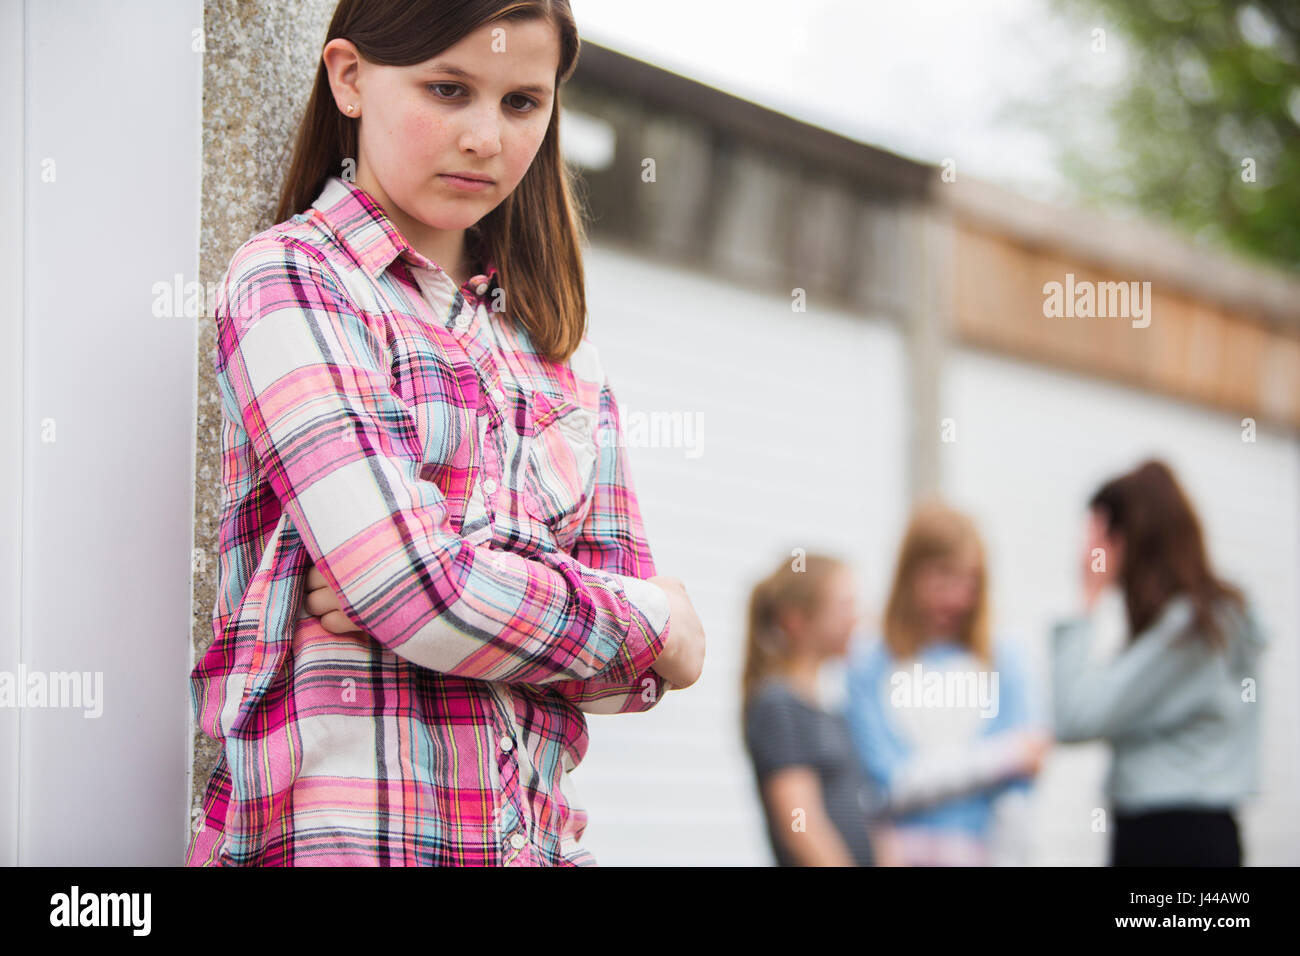 Sad Pre Teen Girl Feeling Left Out By Friends Stock Photo